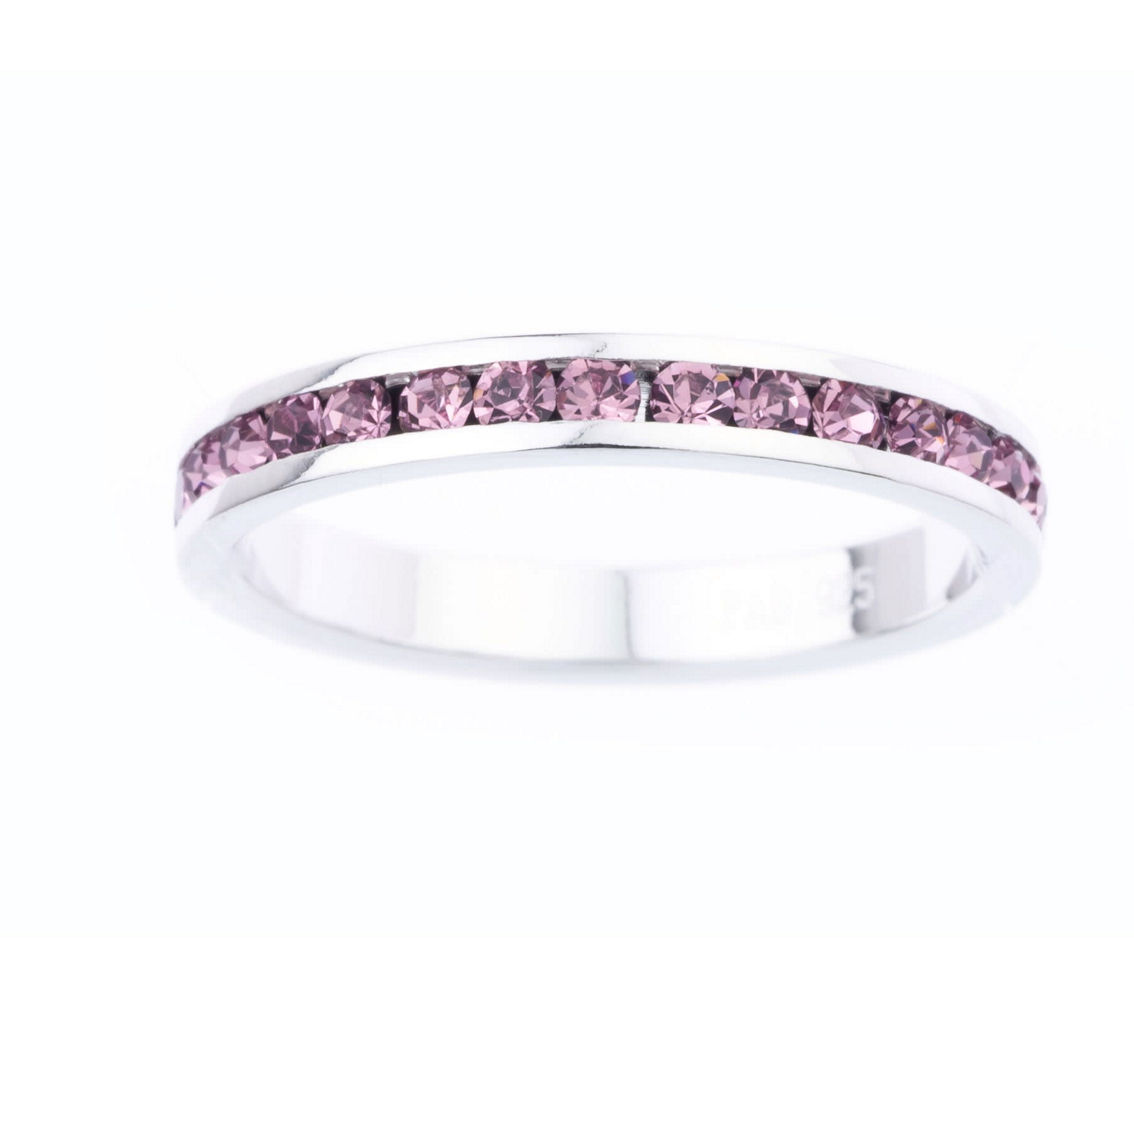 Sterling Silver Crystal Birthstone Eternity Ring - Image 2 of 2